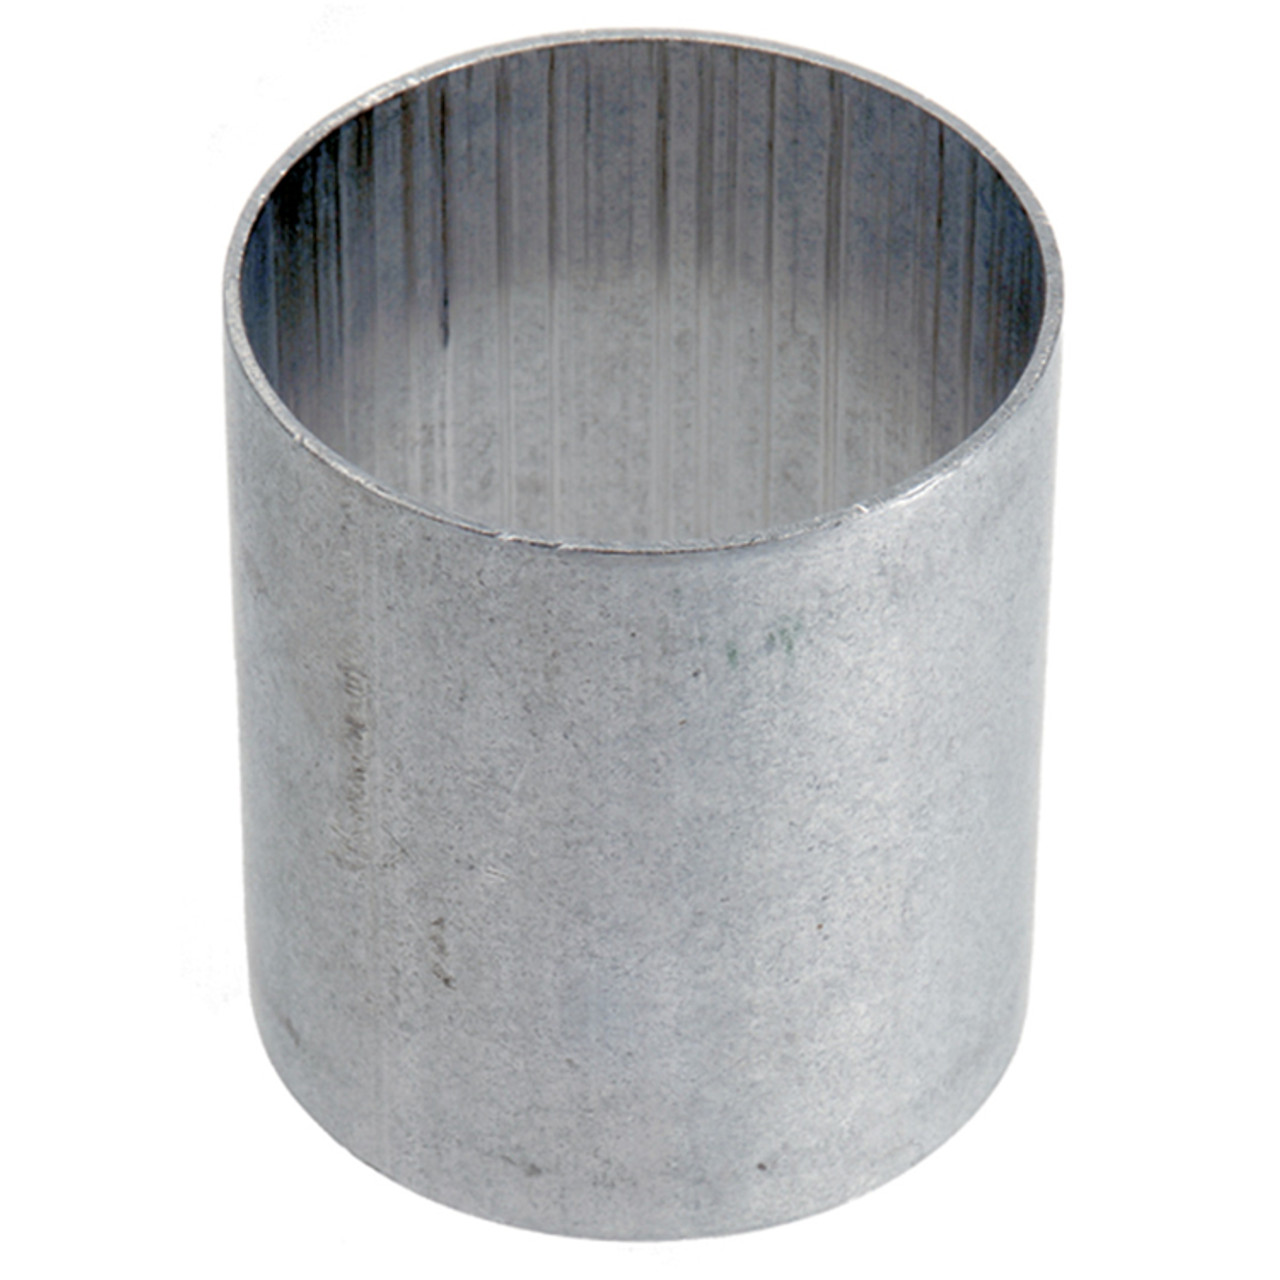 1.38" Stainless Steel Hose Sleeve   G3SS-138